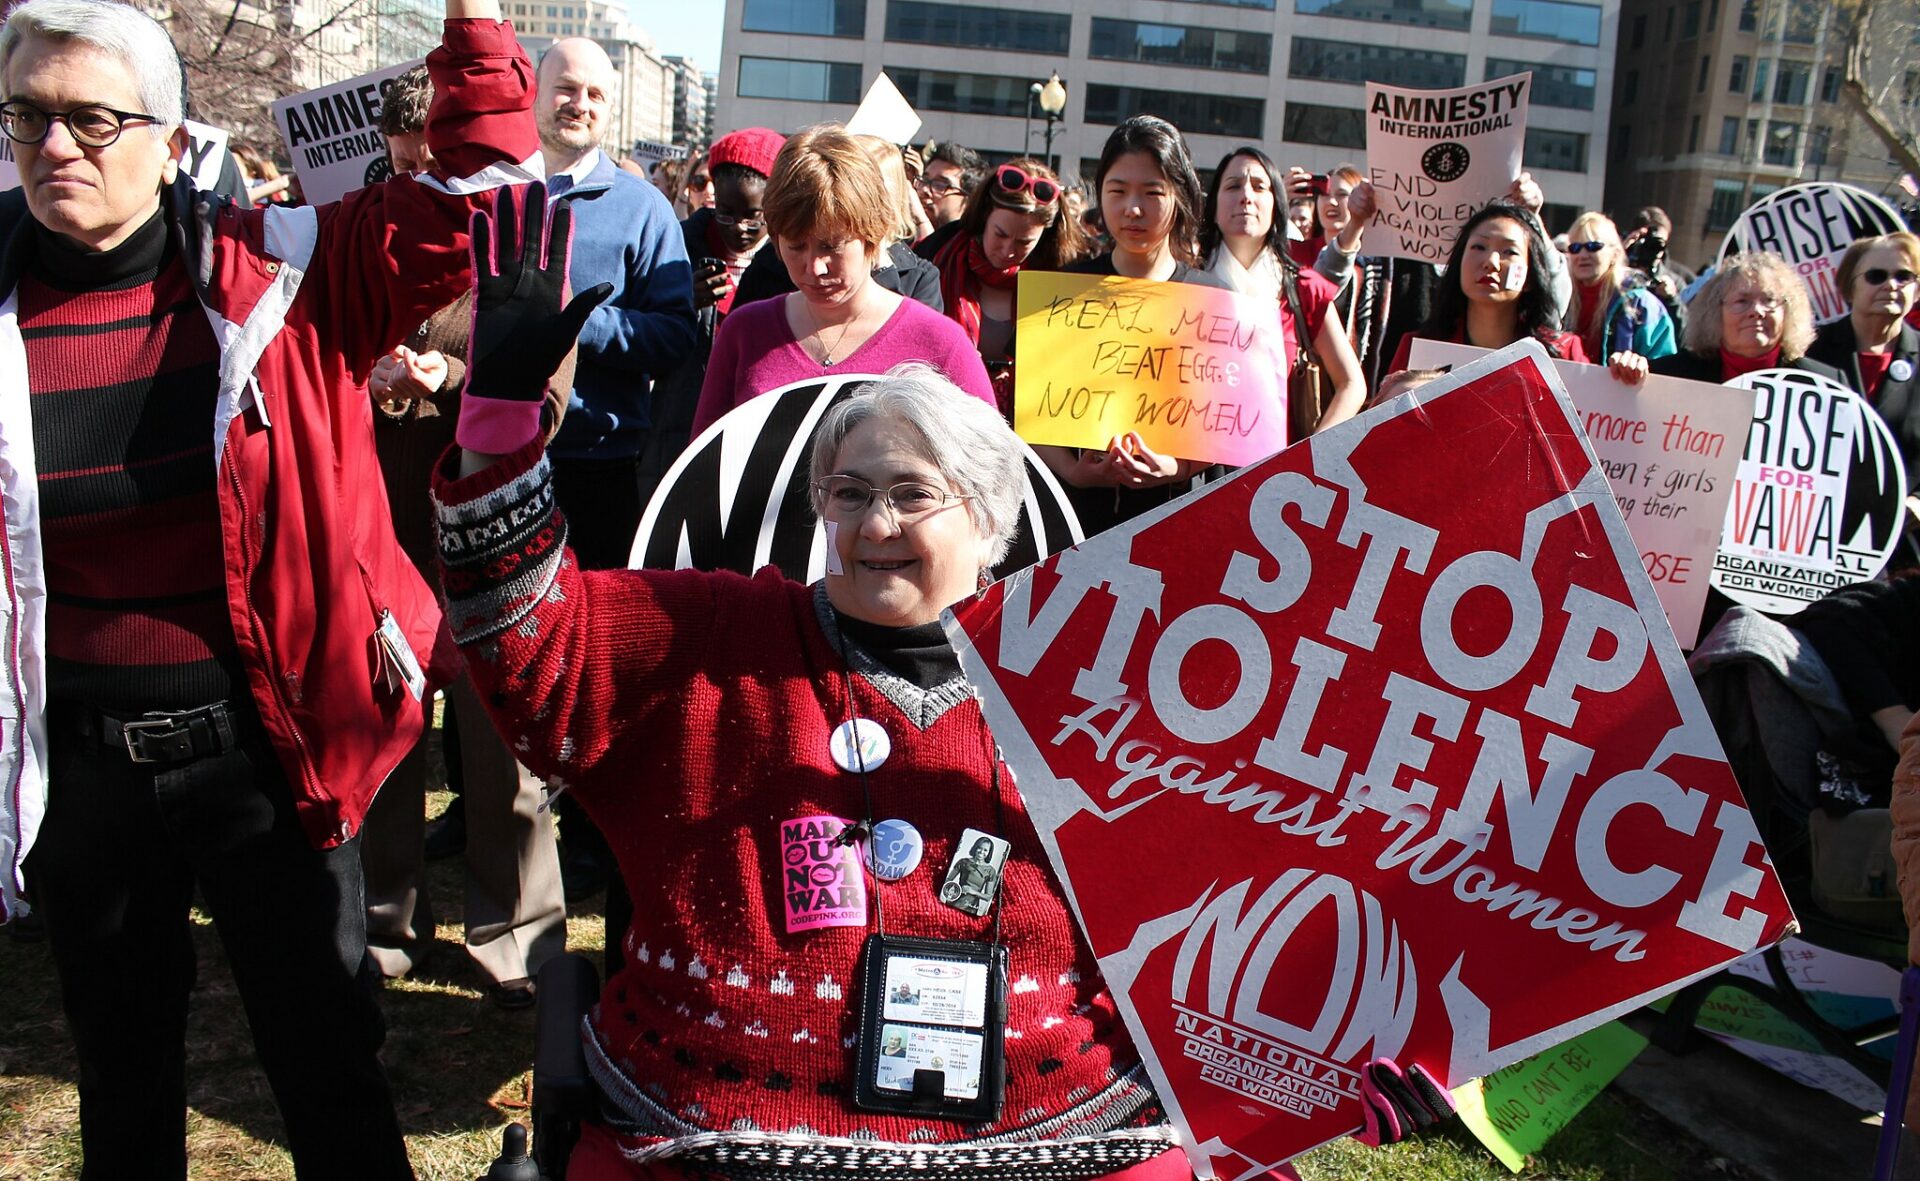 People protesting for an end of violence against women in the 'One Billion Rising' campaign on Farragut Square, Washington D.C., on Valentine's Day 2013 (Elvert Barnes via Wikimedia Commons)